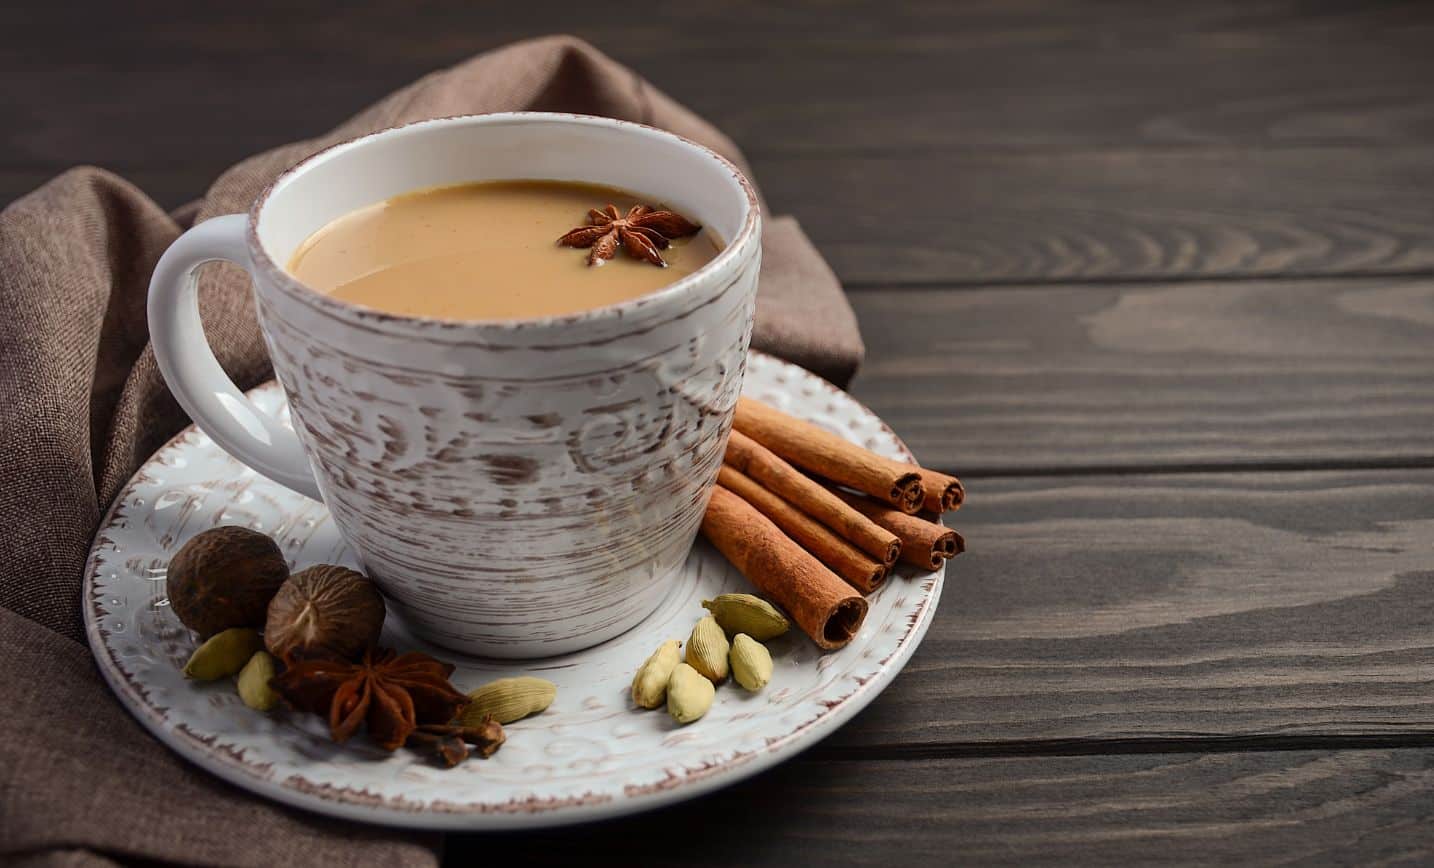 Strong bodied teas like chai are best with milk